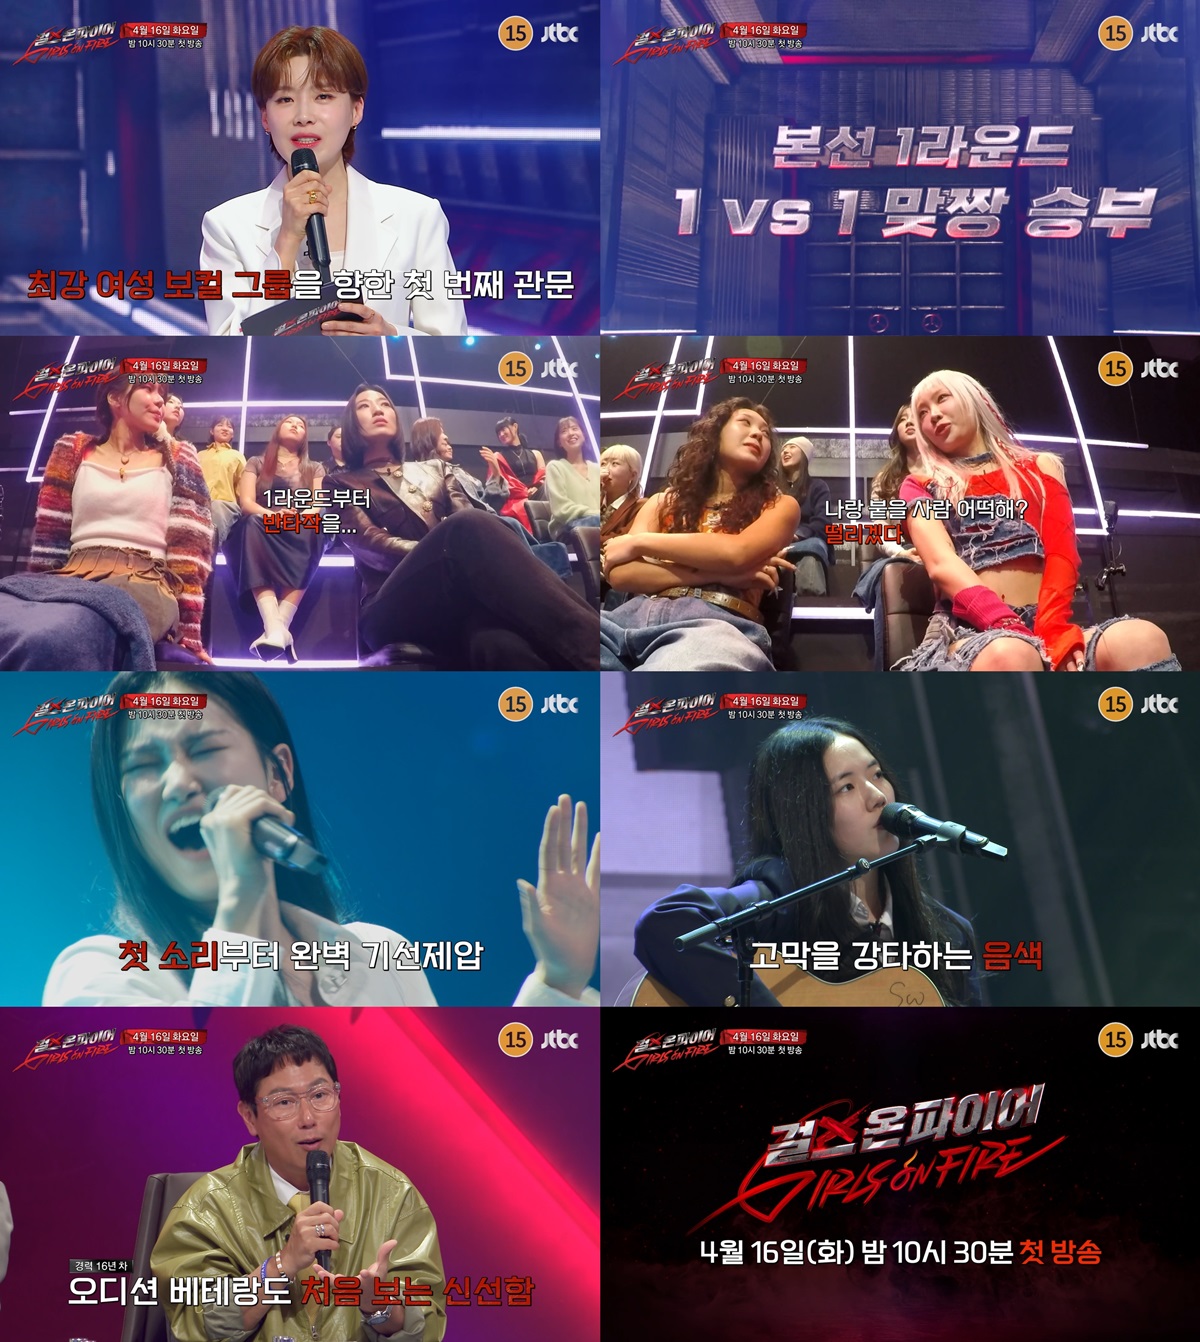 Watch: New Vocal Audition Show “Girls On Fire” Teases Eye-Catching Performances